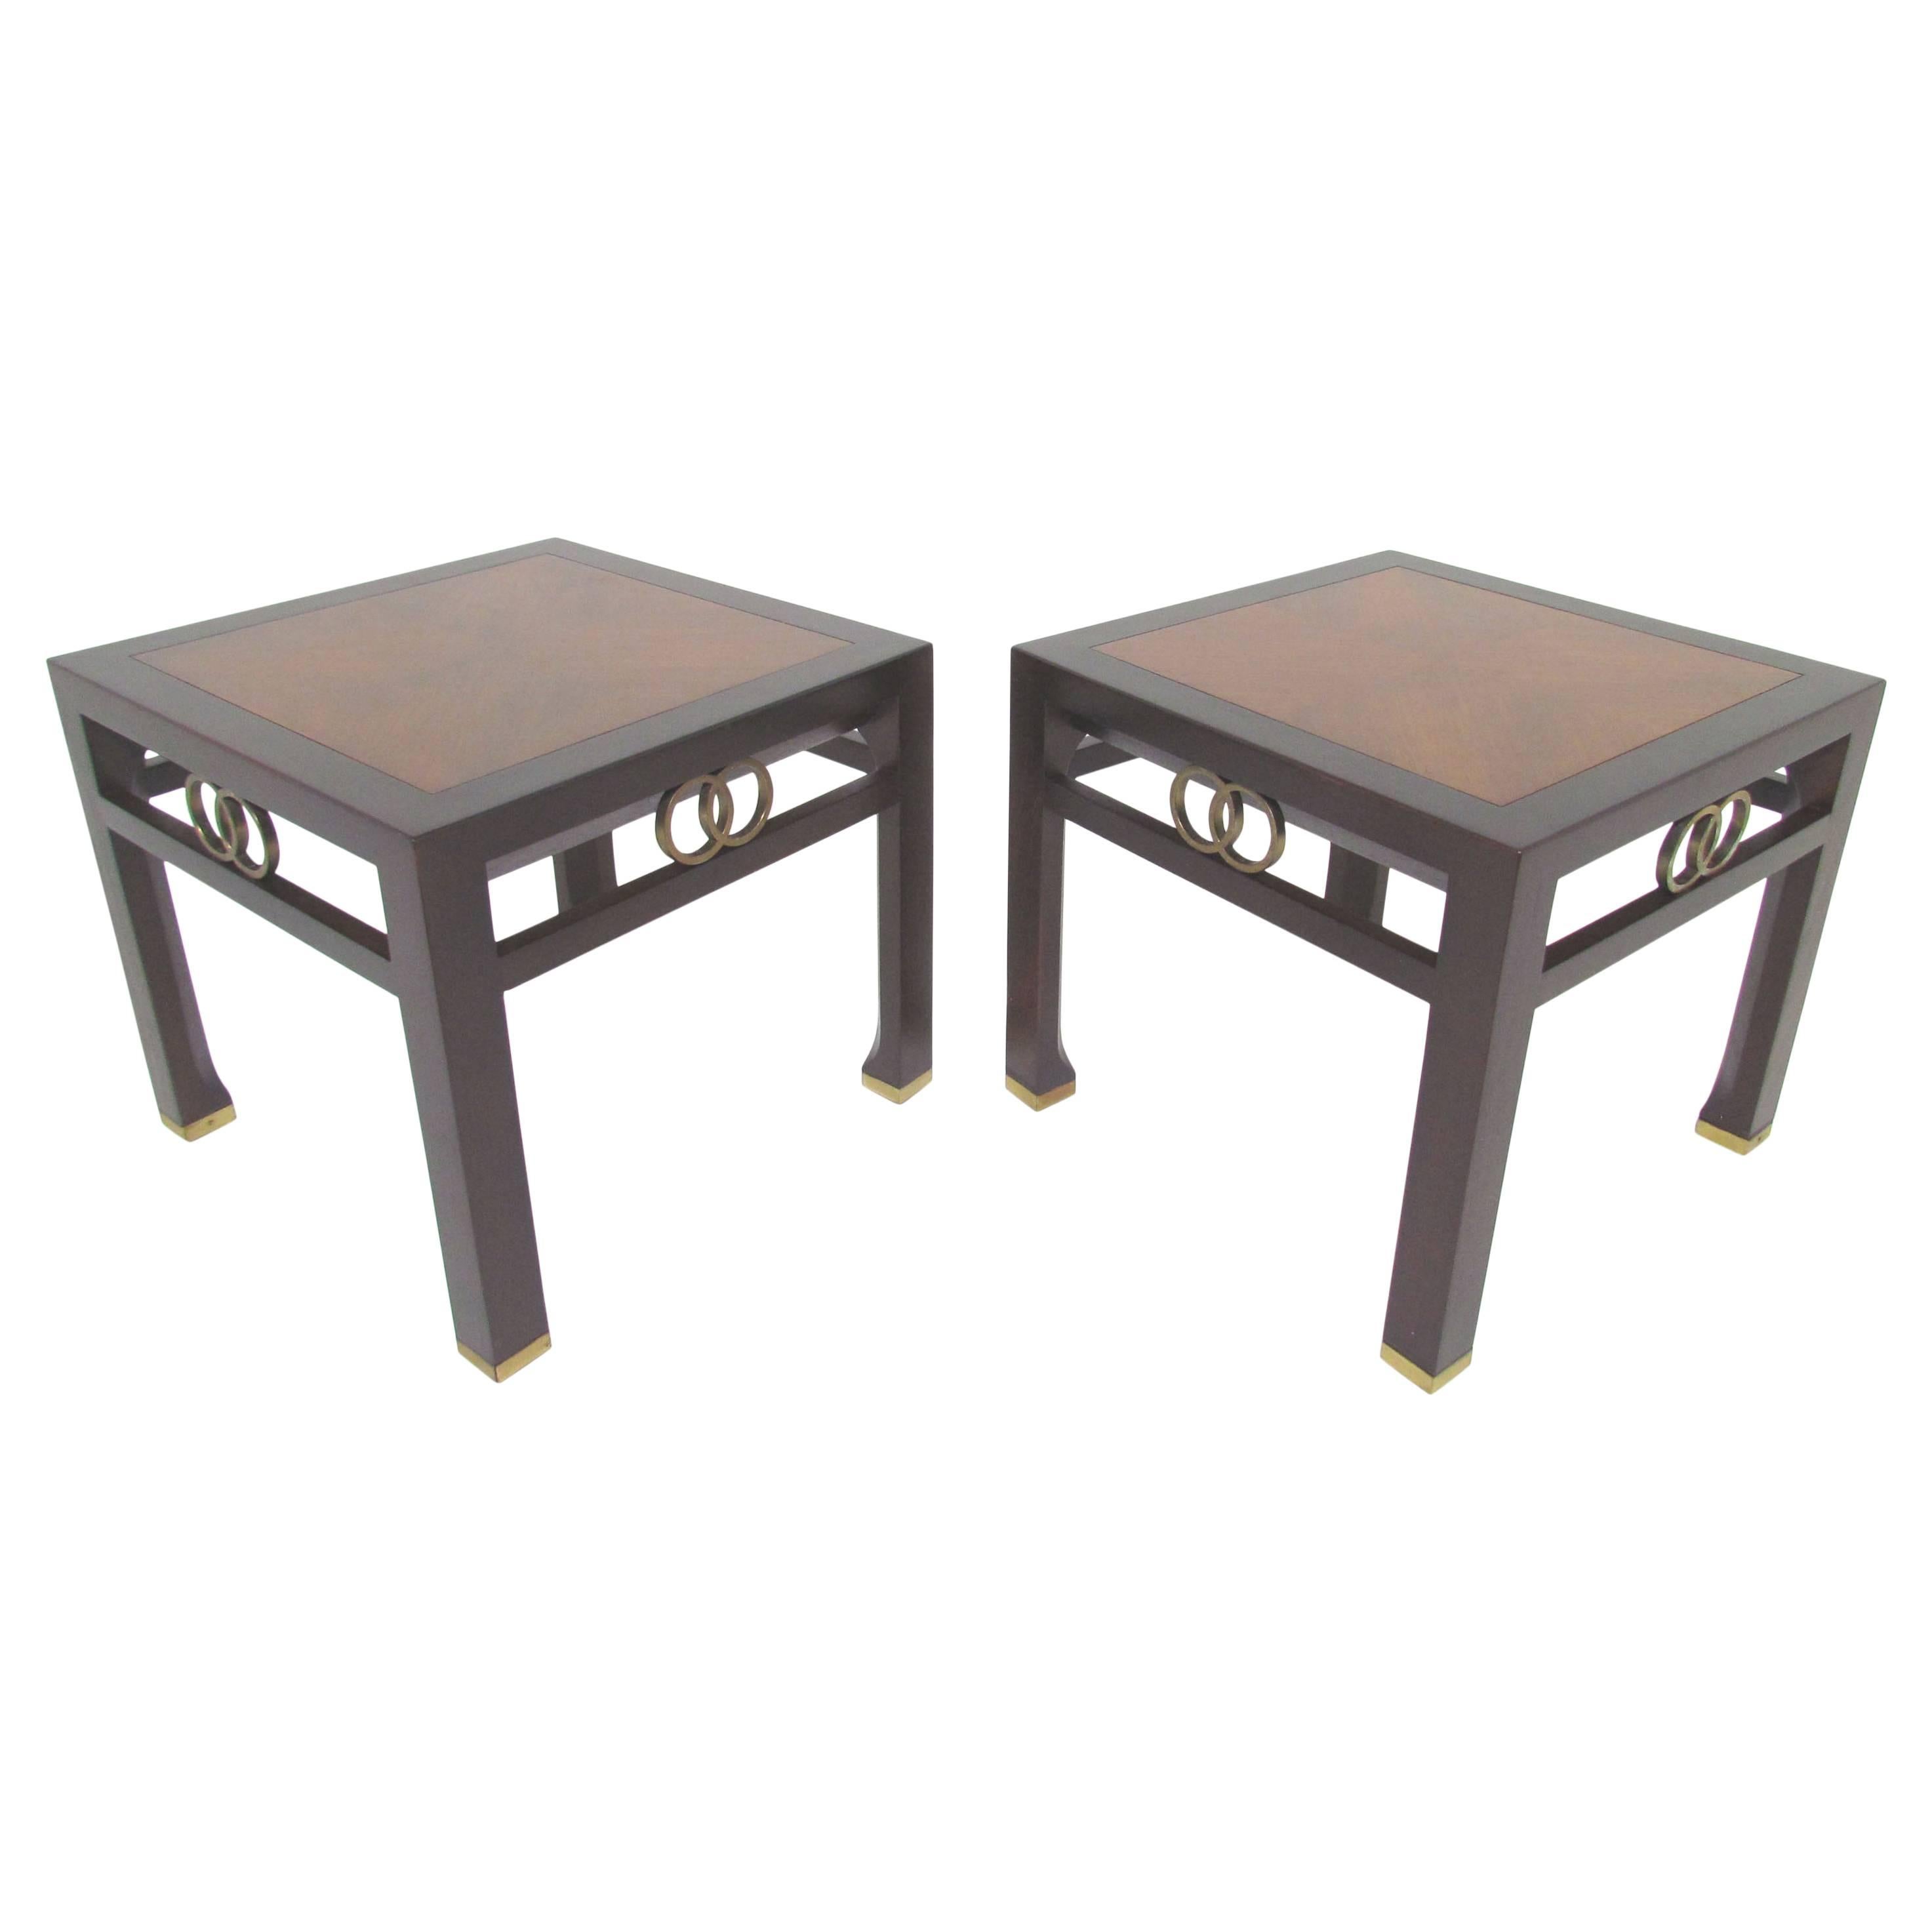 Pair of Two-Toned Side Tables by Michael Taylor for Baker Furniture, circa 1960s